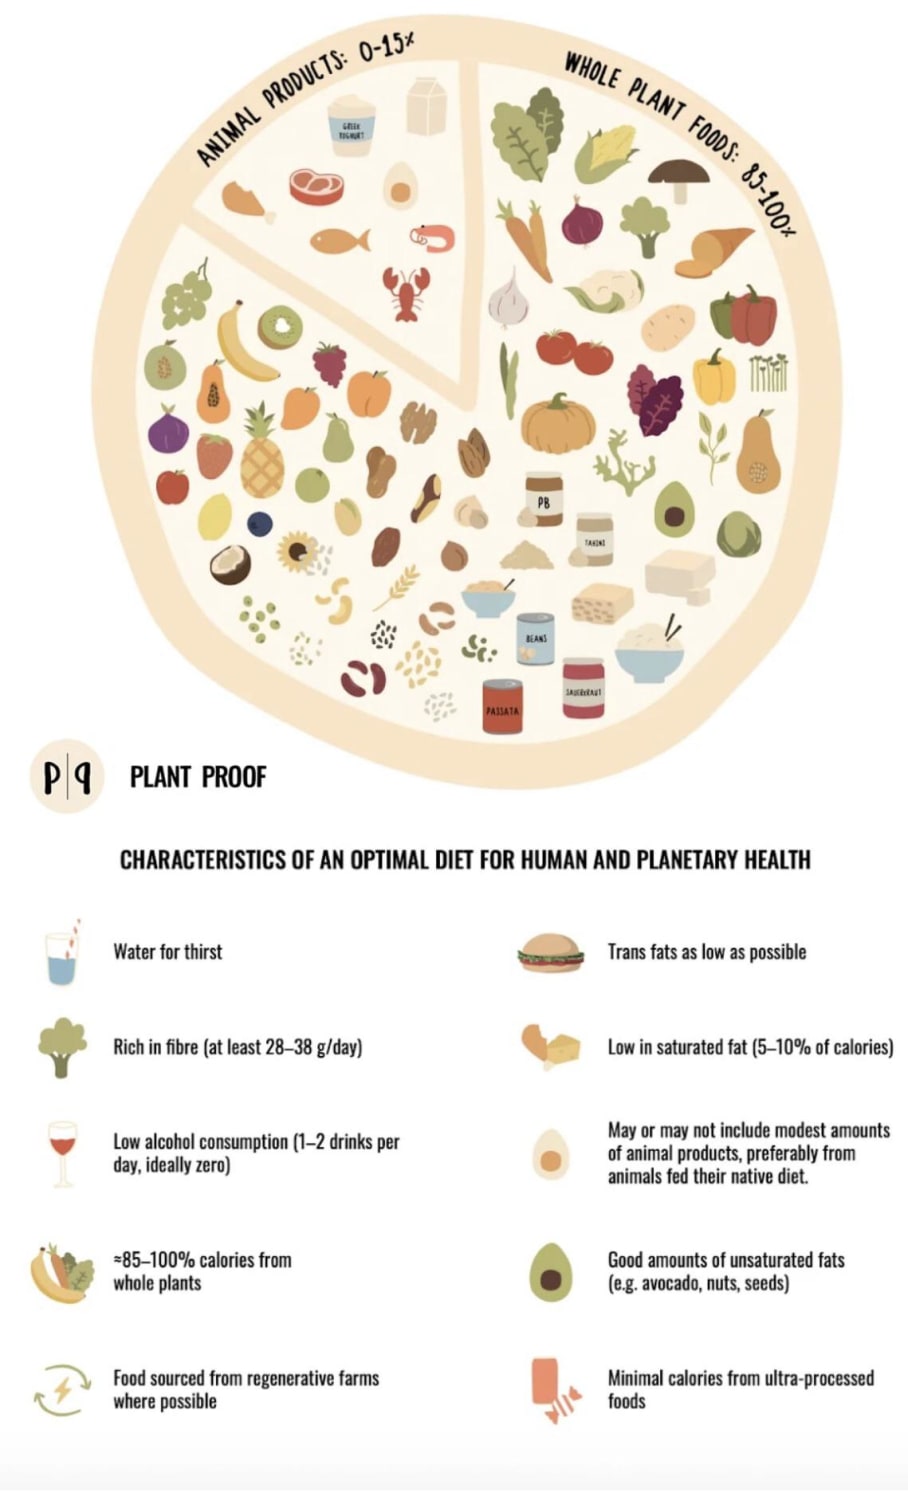 Characteristics of an optimal diet for human and planetary health